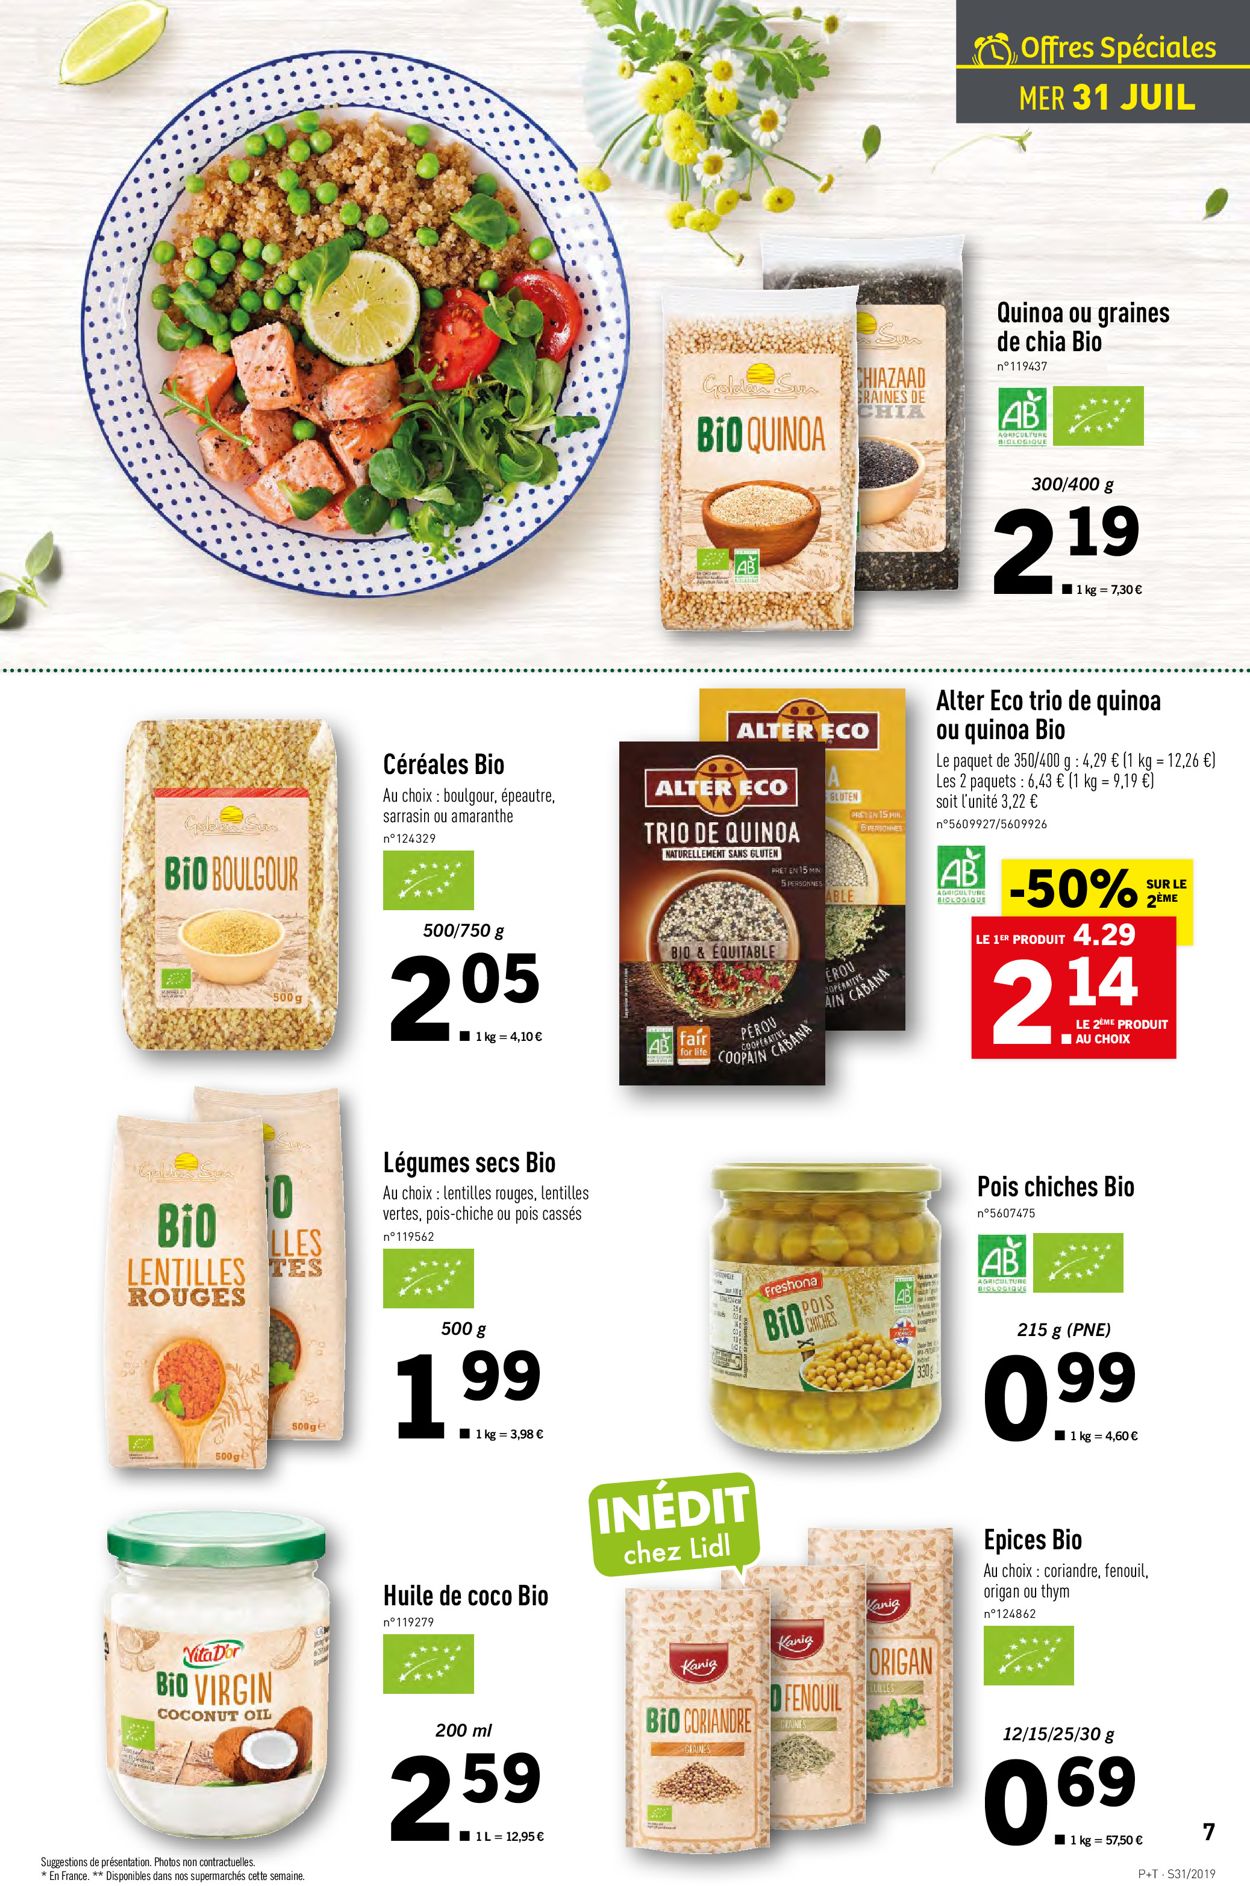 Lidl Catalogue - 31.07-06.08.2019 (Page 7)